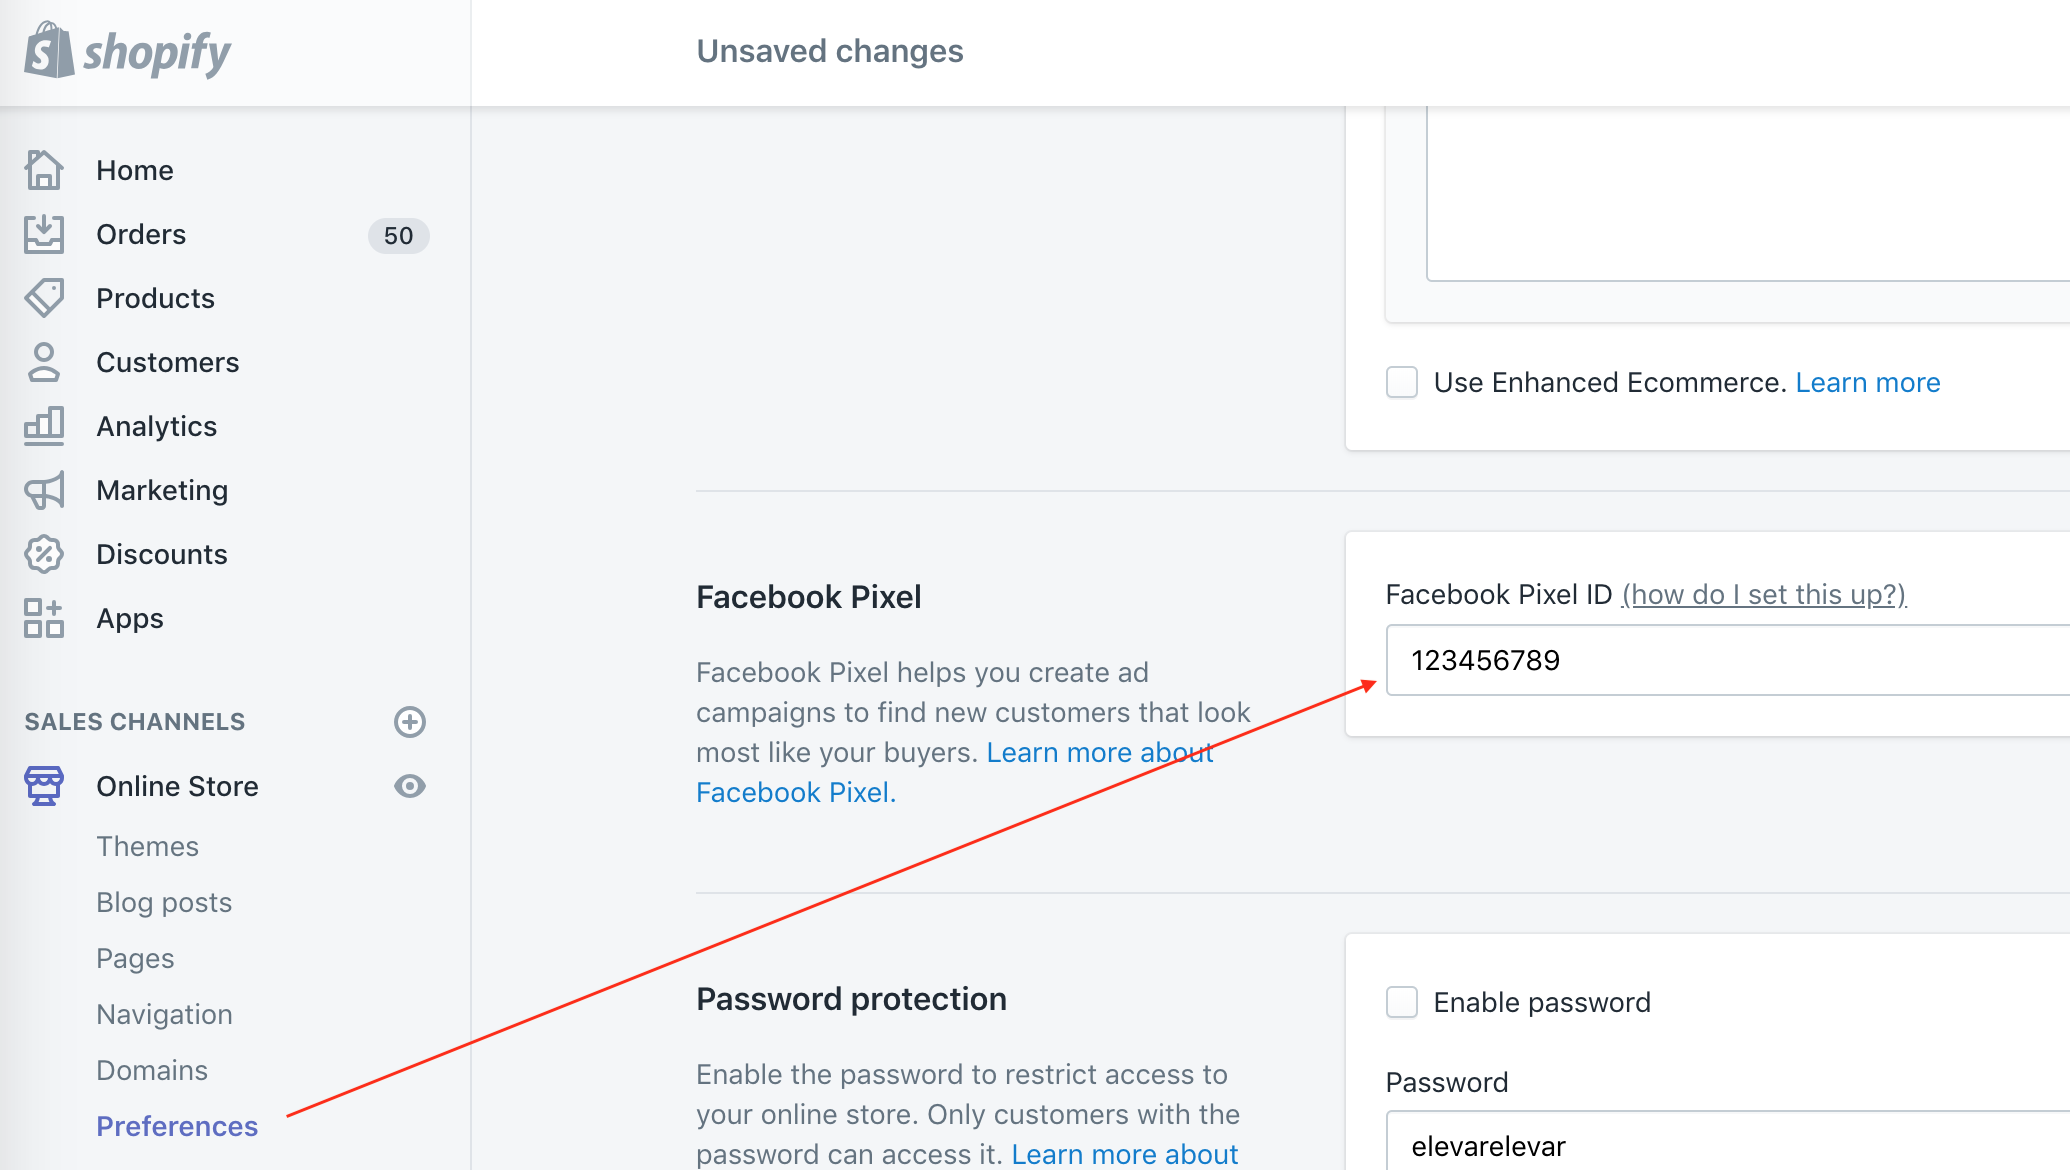 shopify facebook pixel id setting